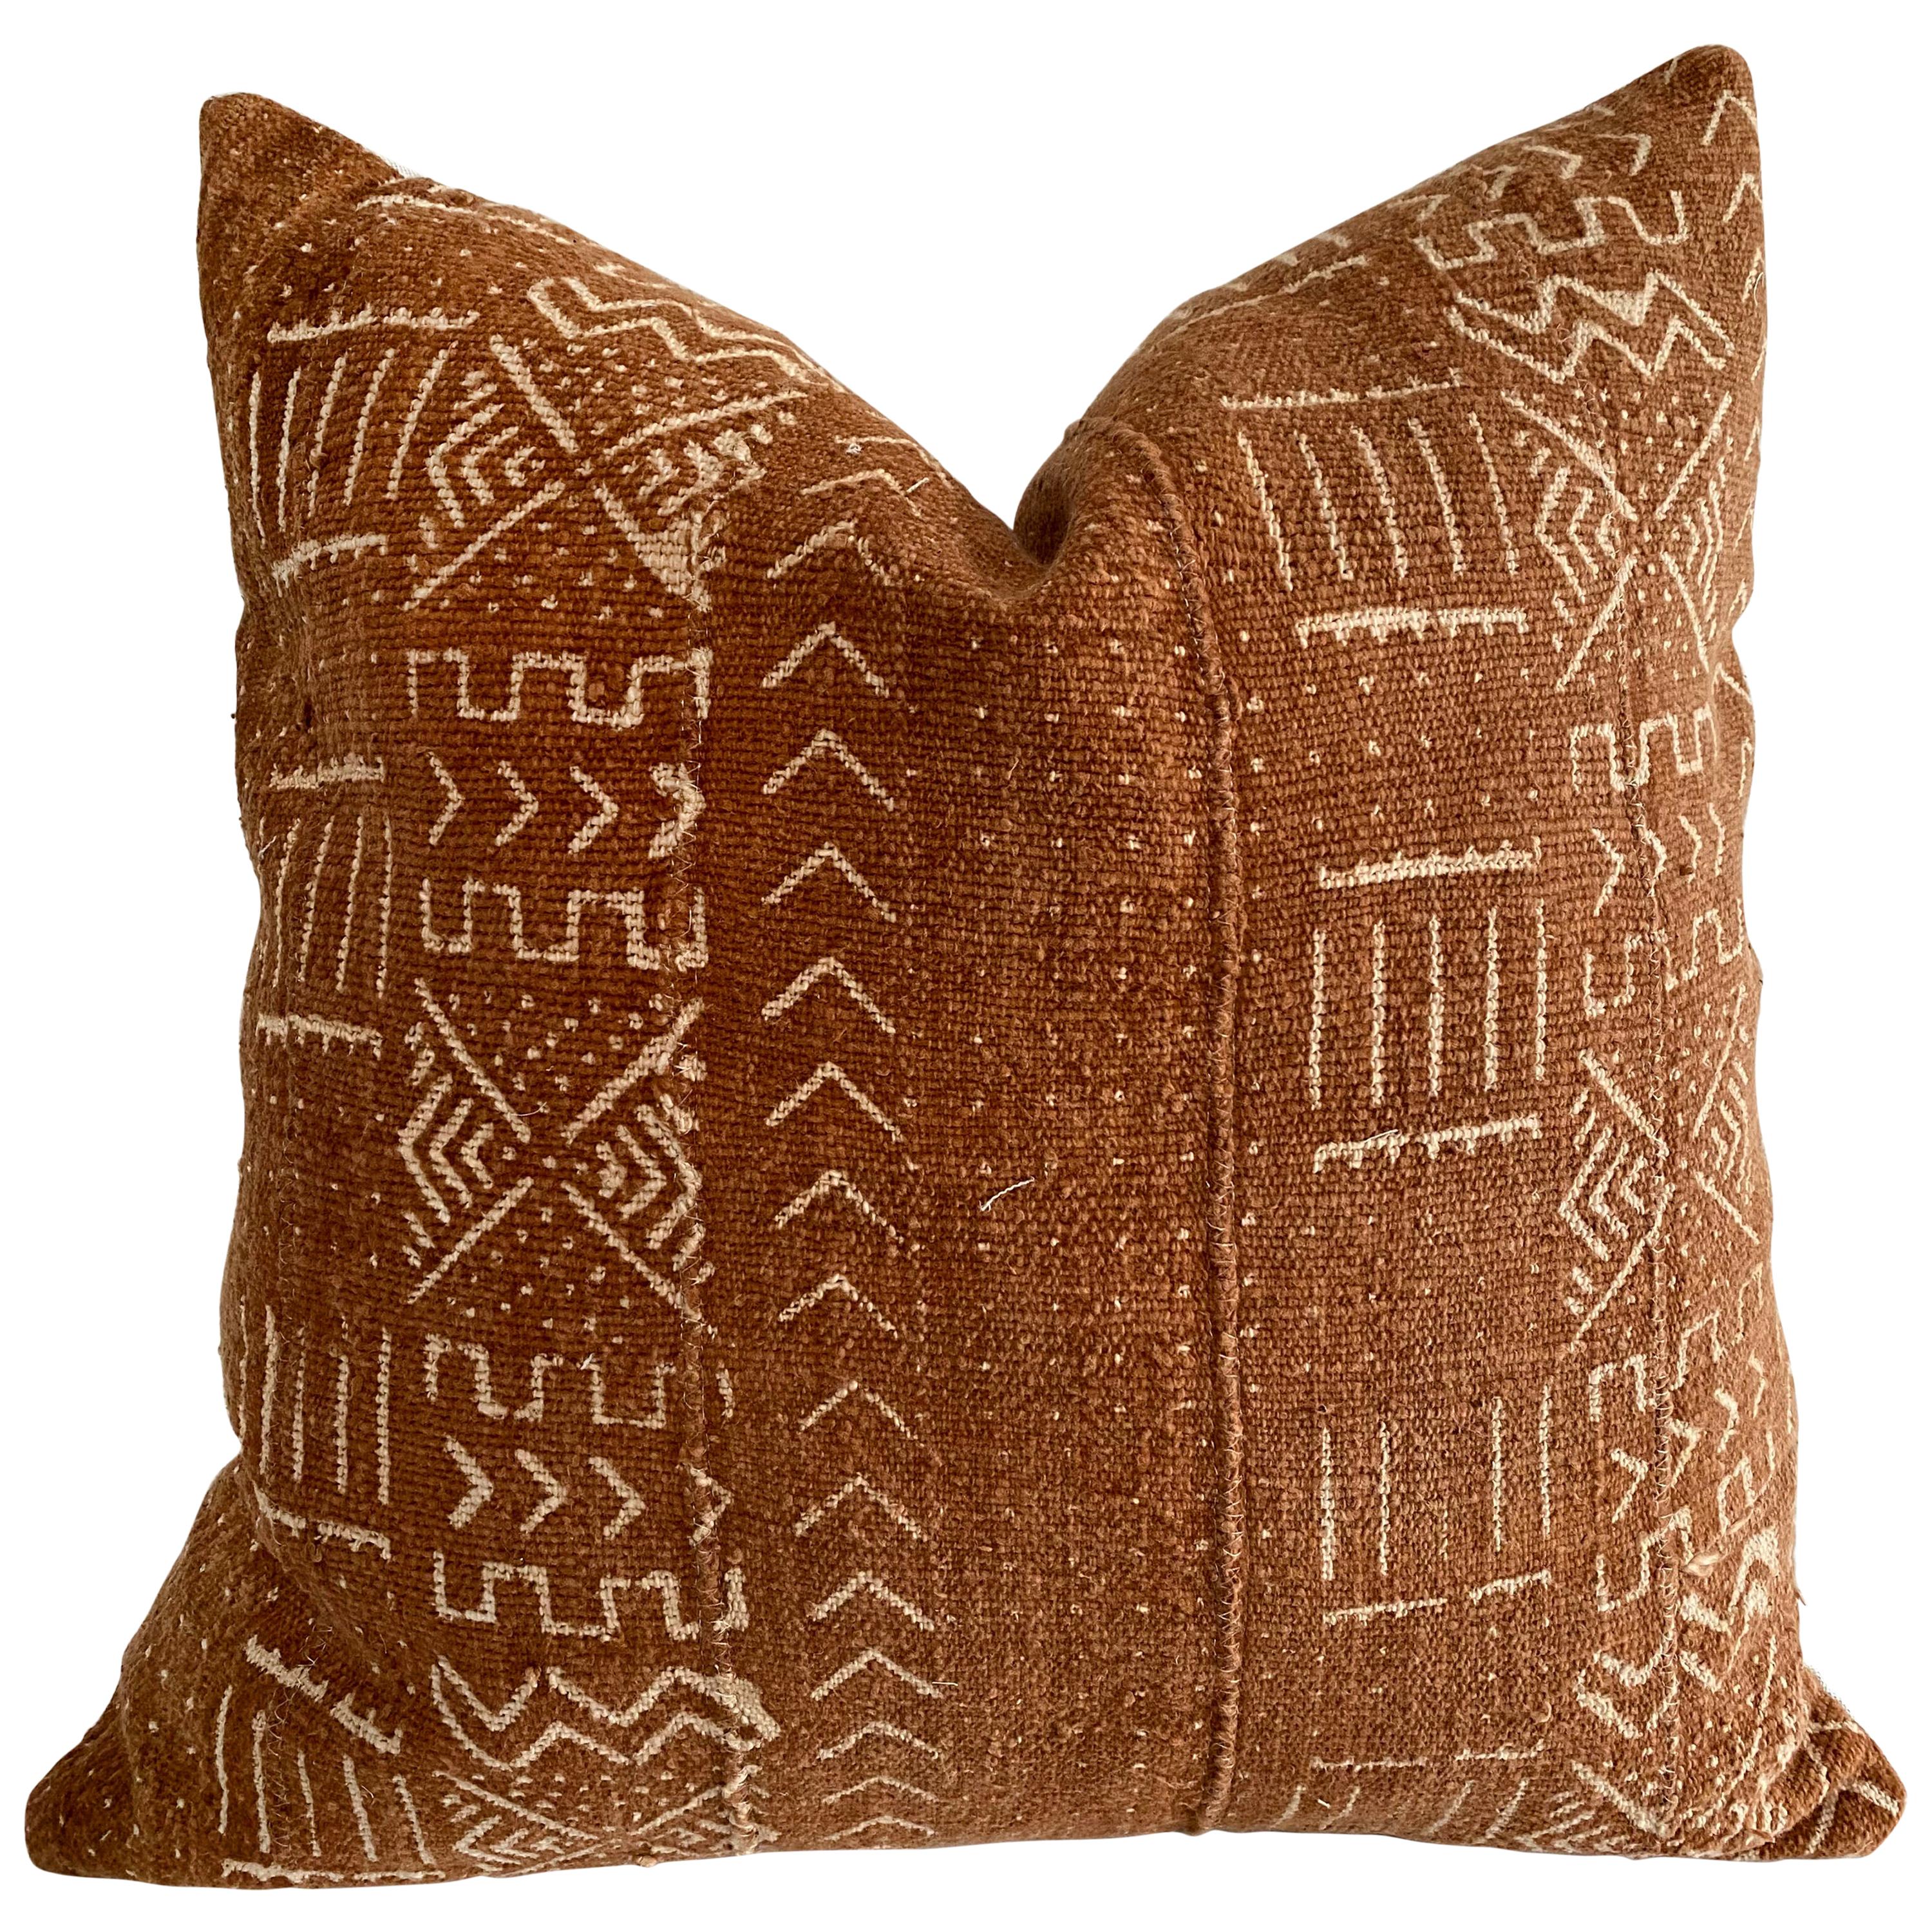 Vintage Deep Rust Colored African Mali Cloth Pillow with Insert